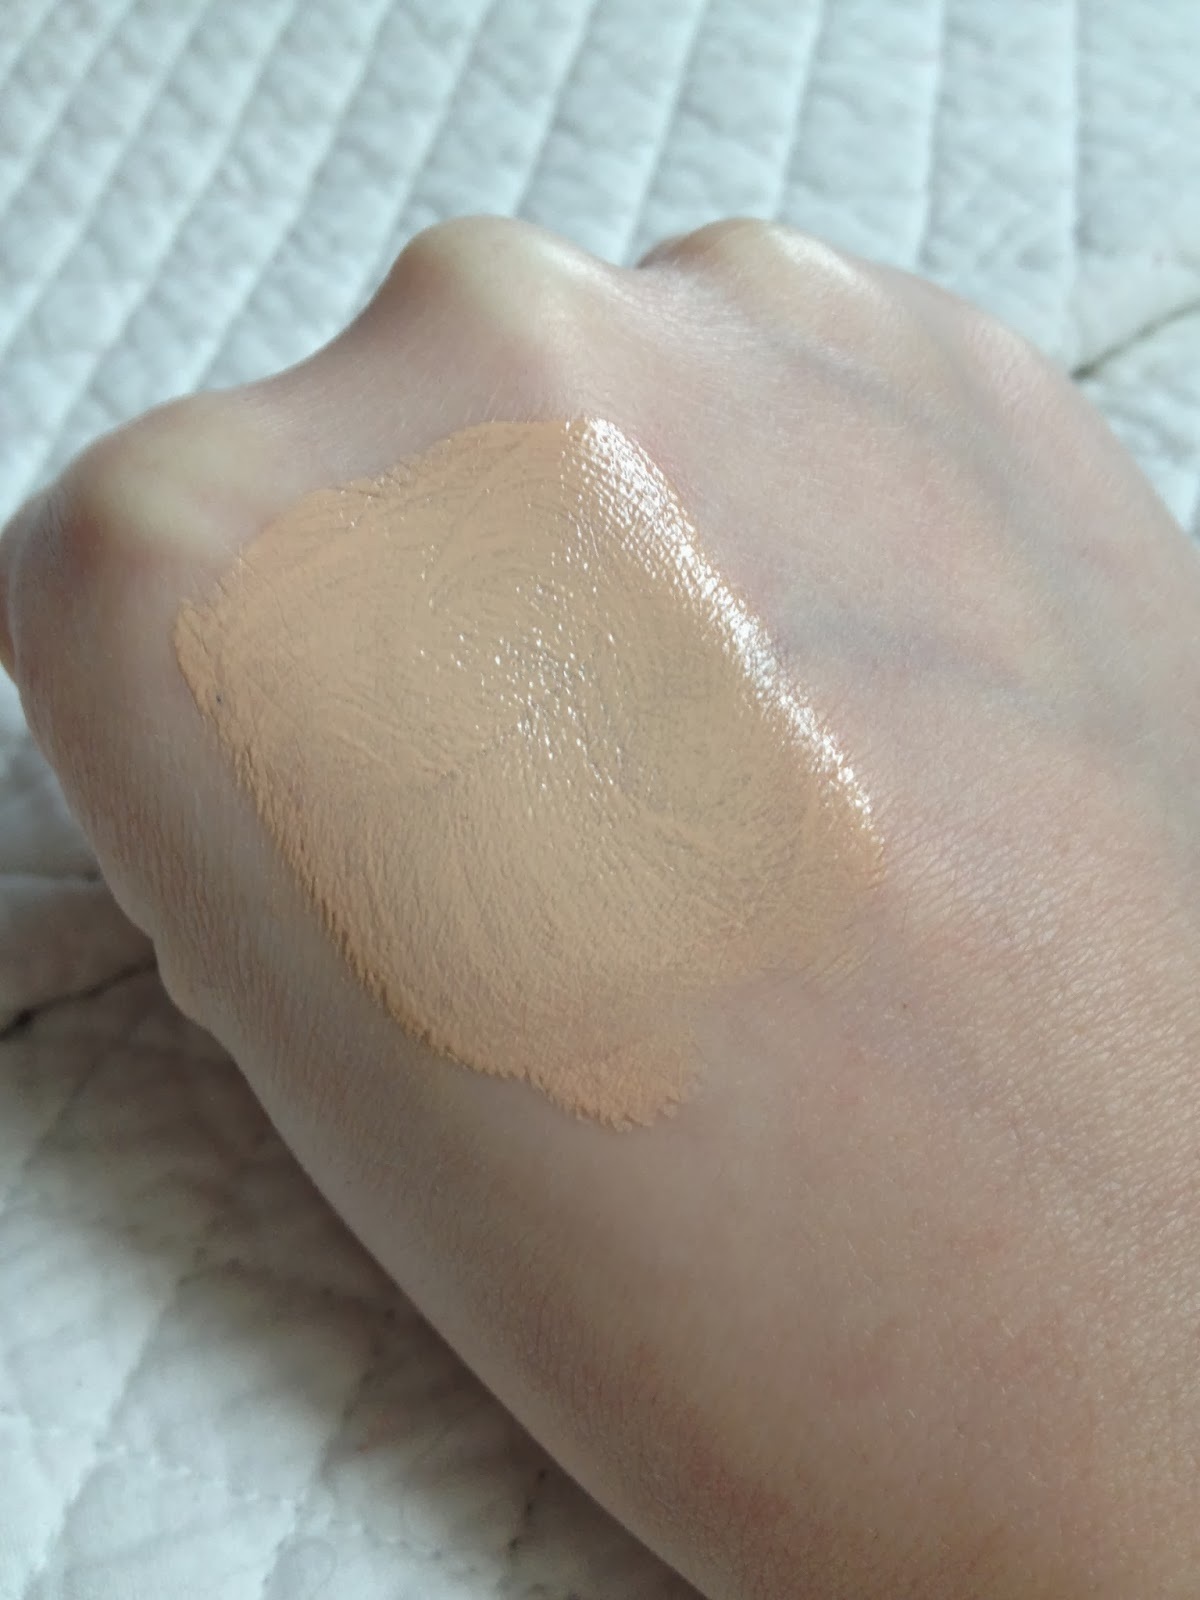 dior capture totale foundation swatches